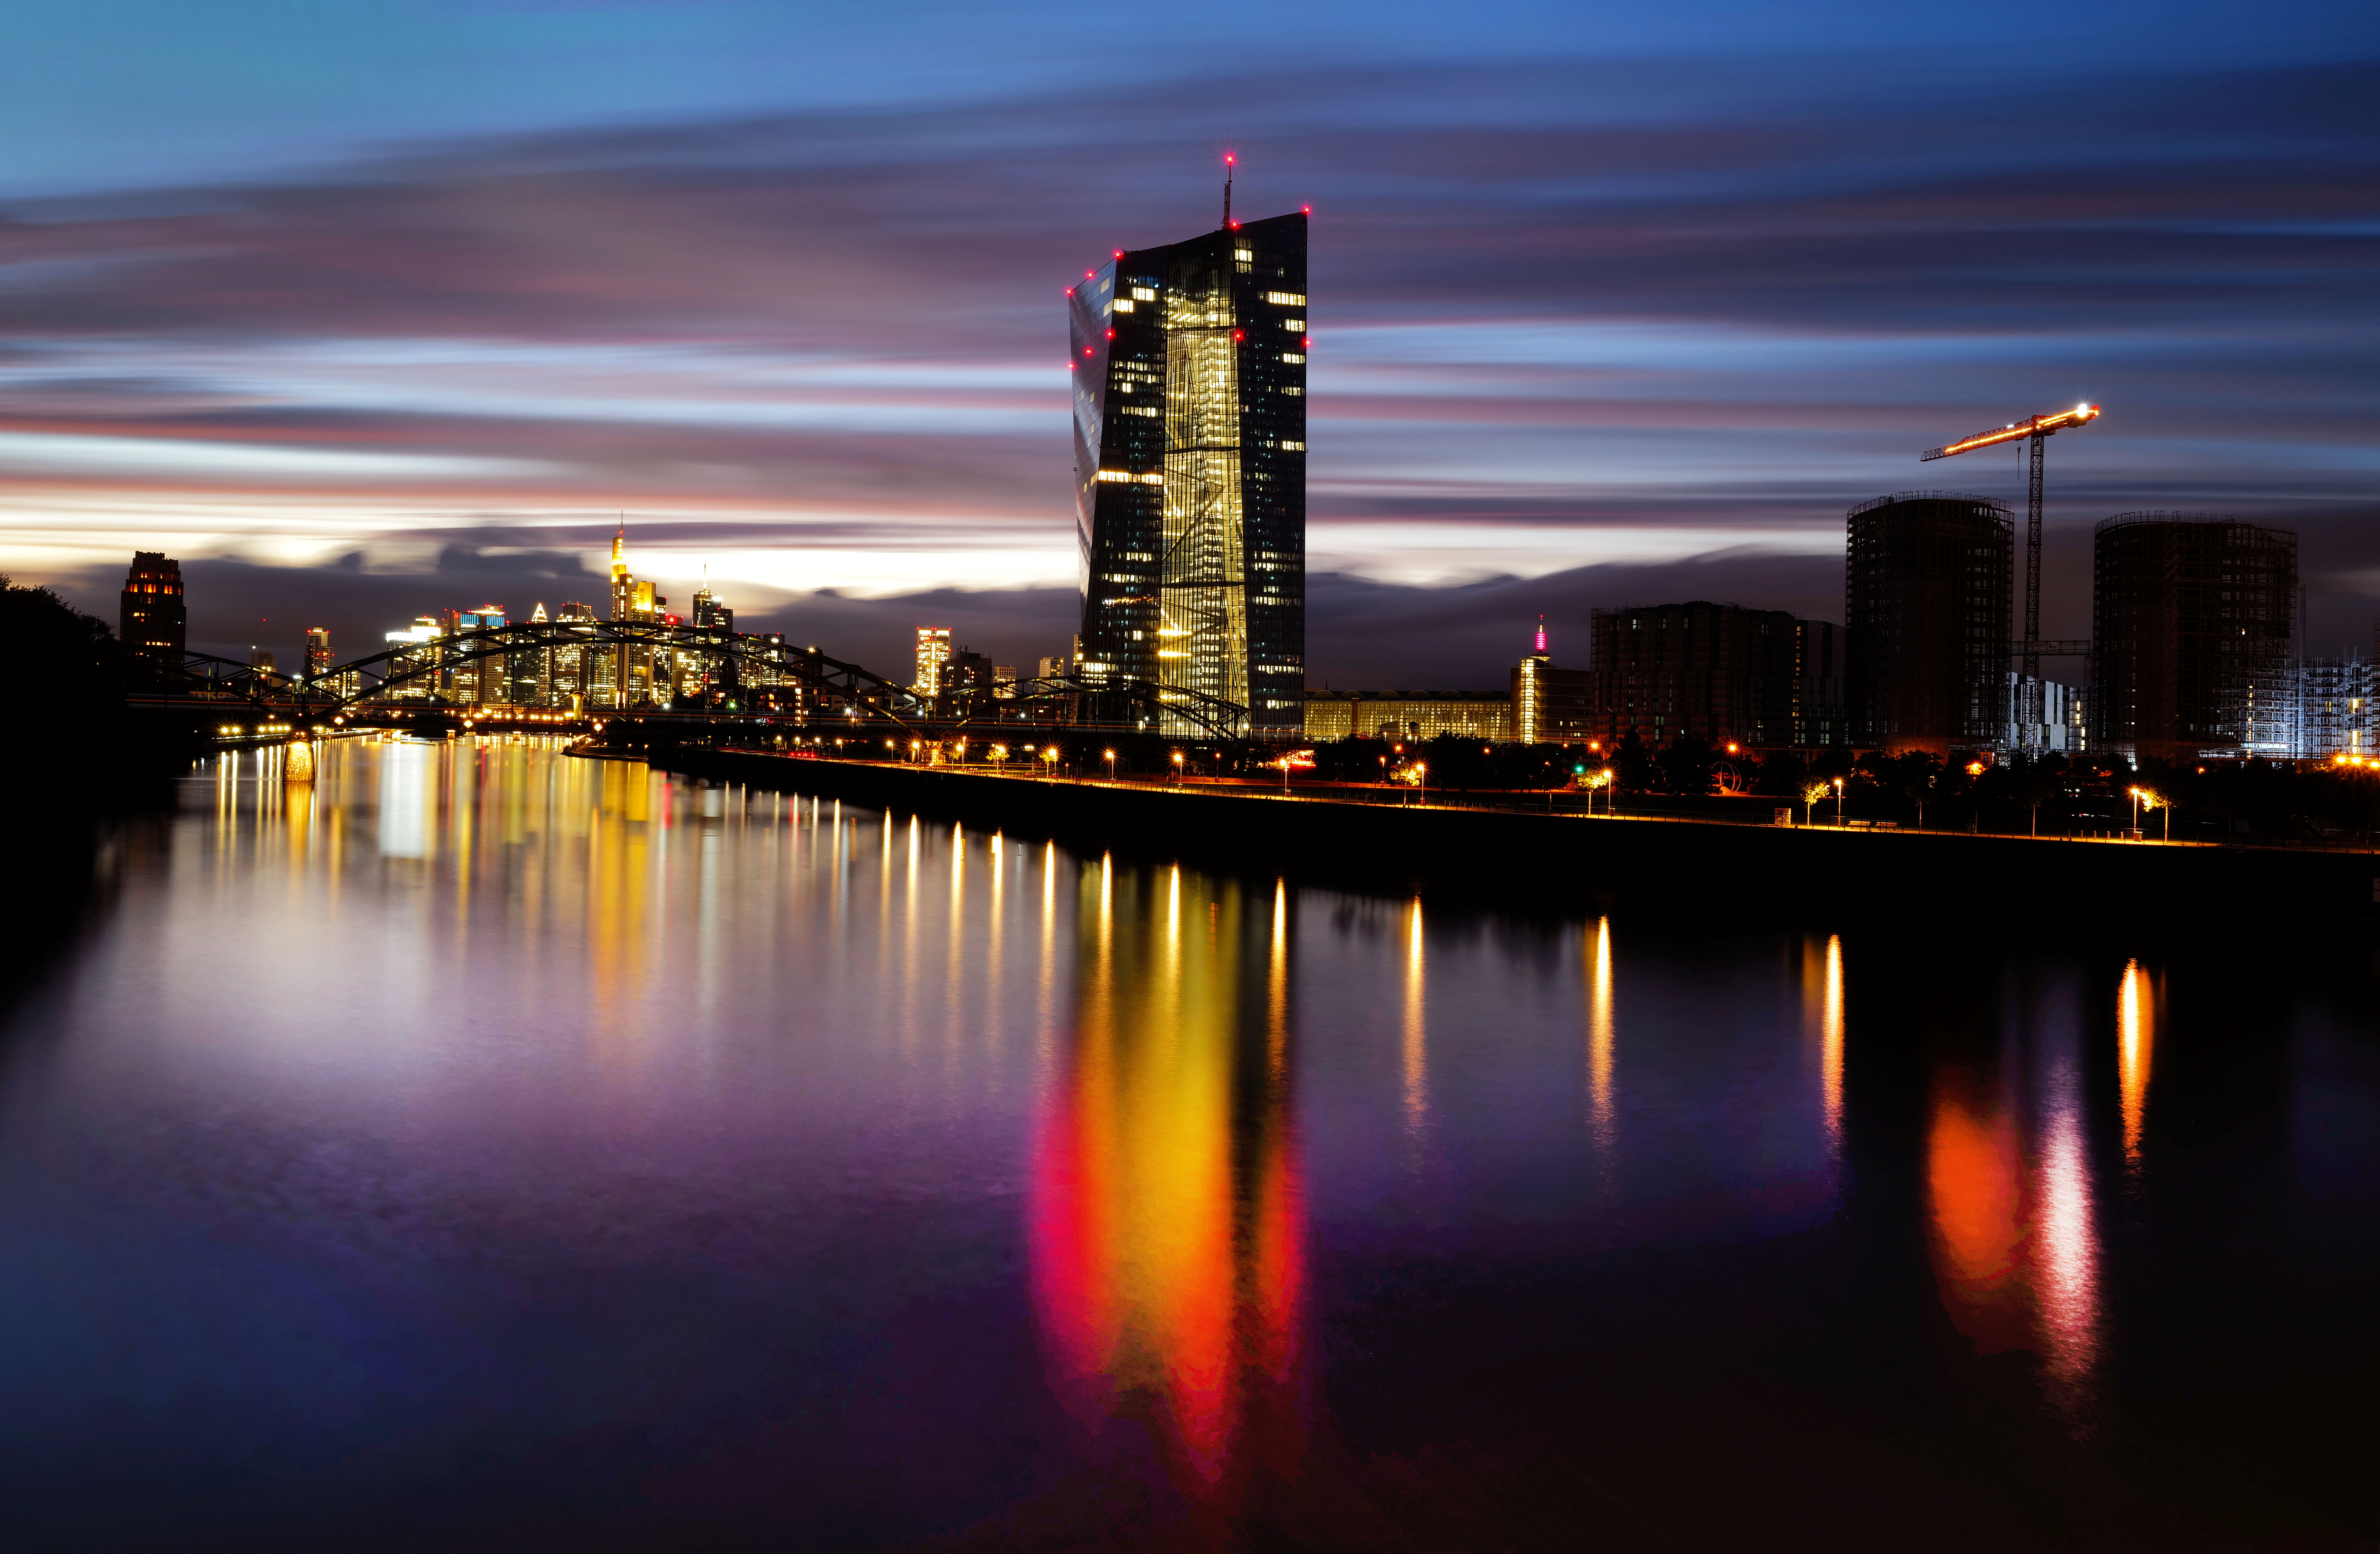 The skyline with the banking district and the headquarters of the European Central Bank (ECB) are photographed in Frankfurt